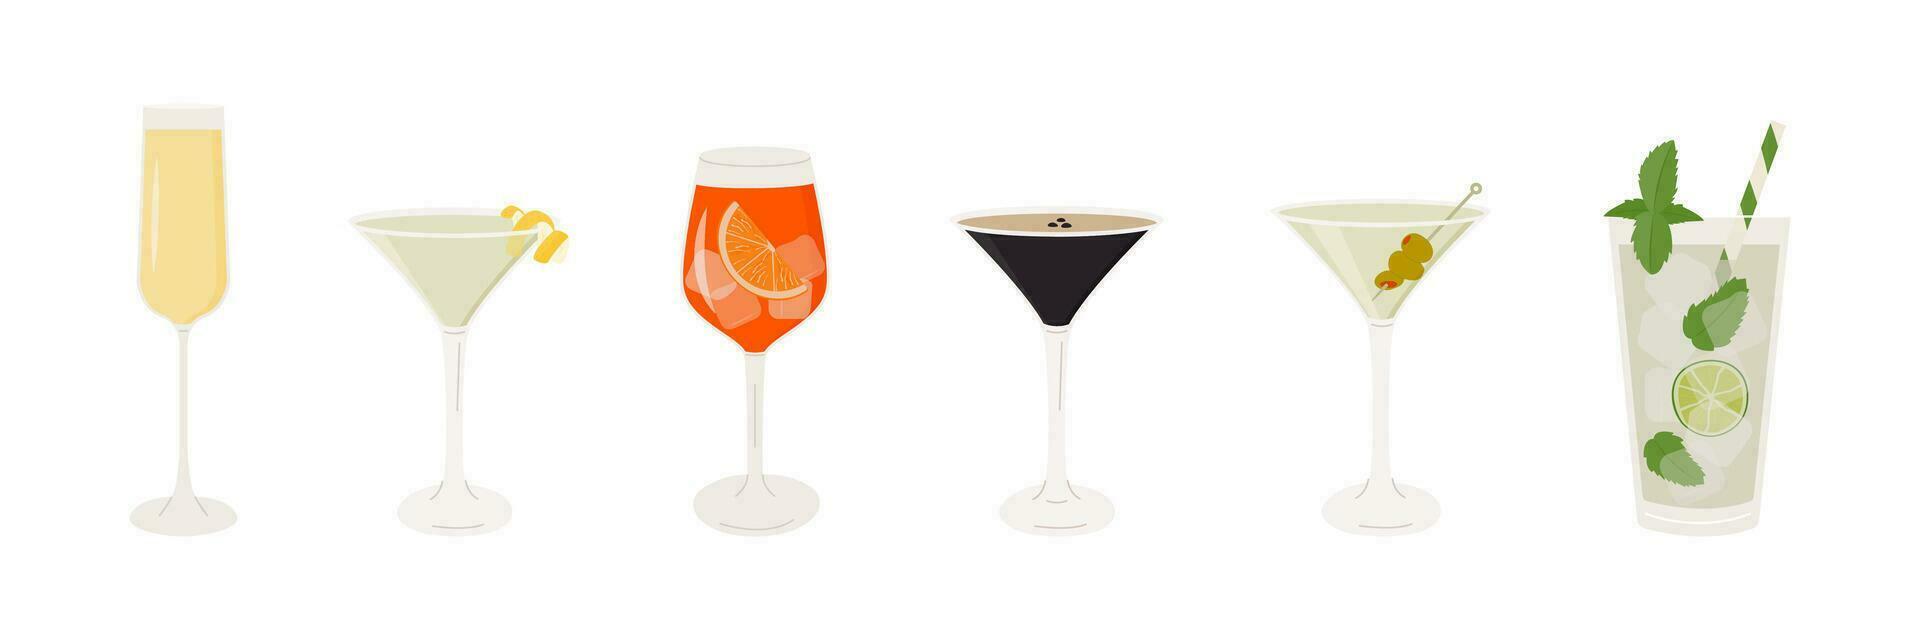 Set of classic cocktails. Different alcoholic drinks in various glasses. Summer aperitif garnish with lime twist, orange slice, olive skewer, cherry. Vector illustration of soft and alcohol beverages.